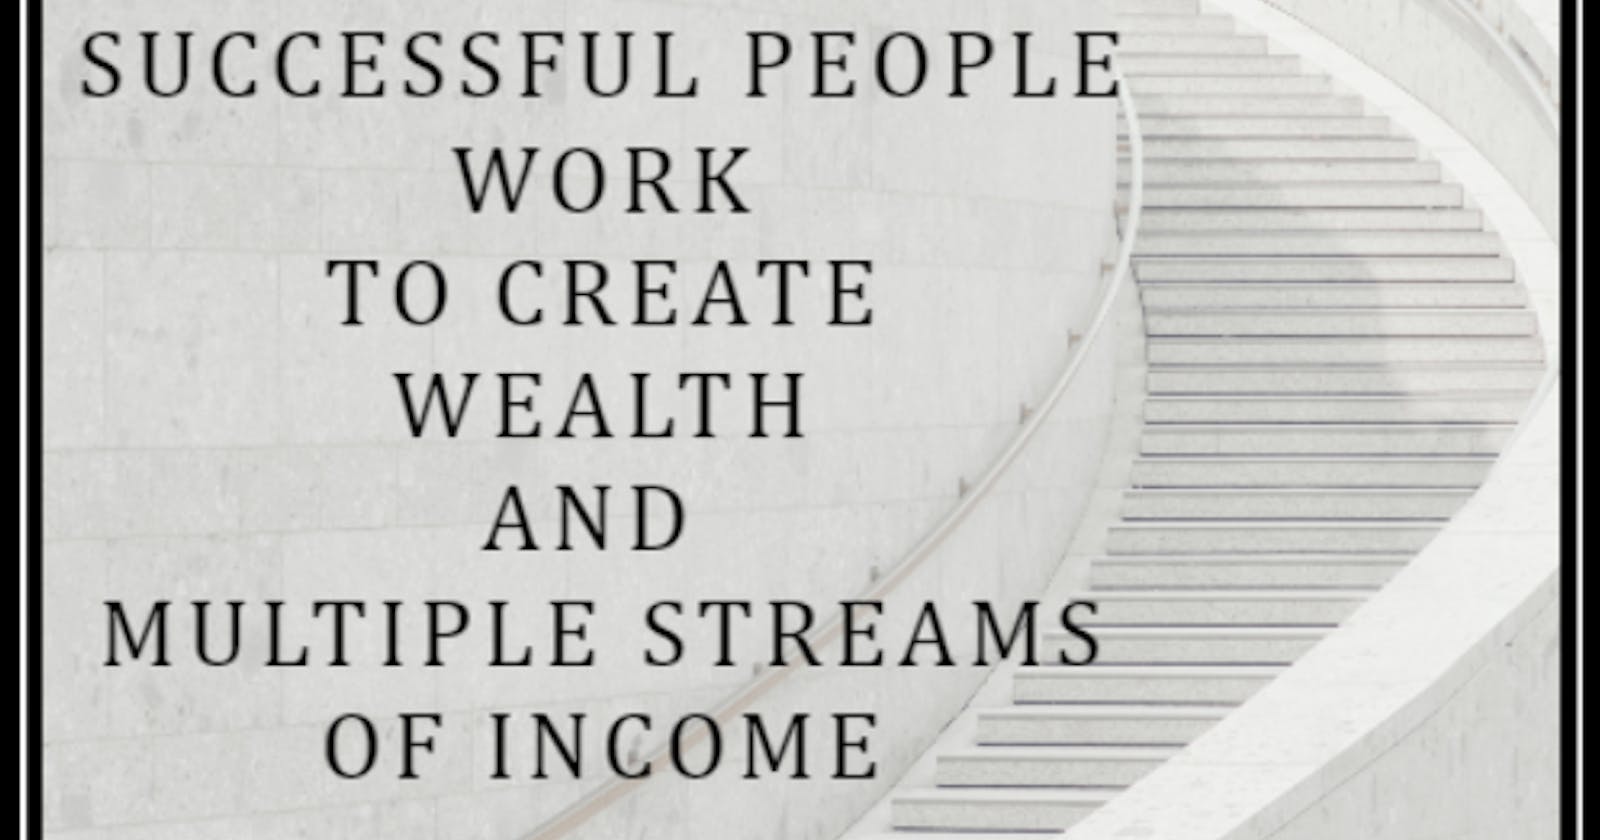 Millionaire way of success: Multiple streams of income